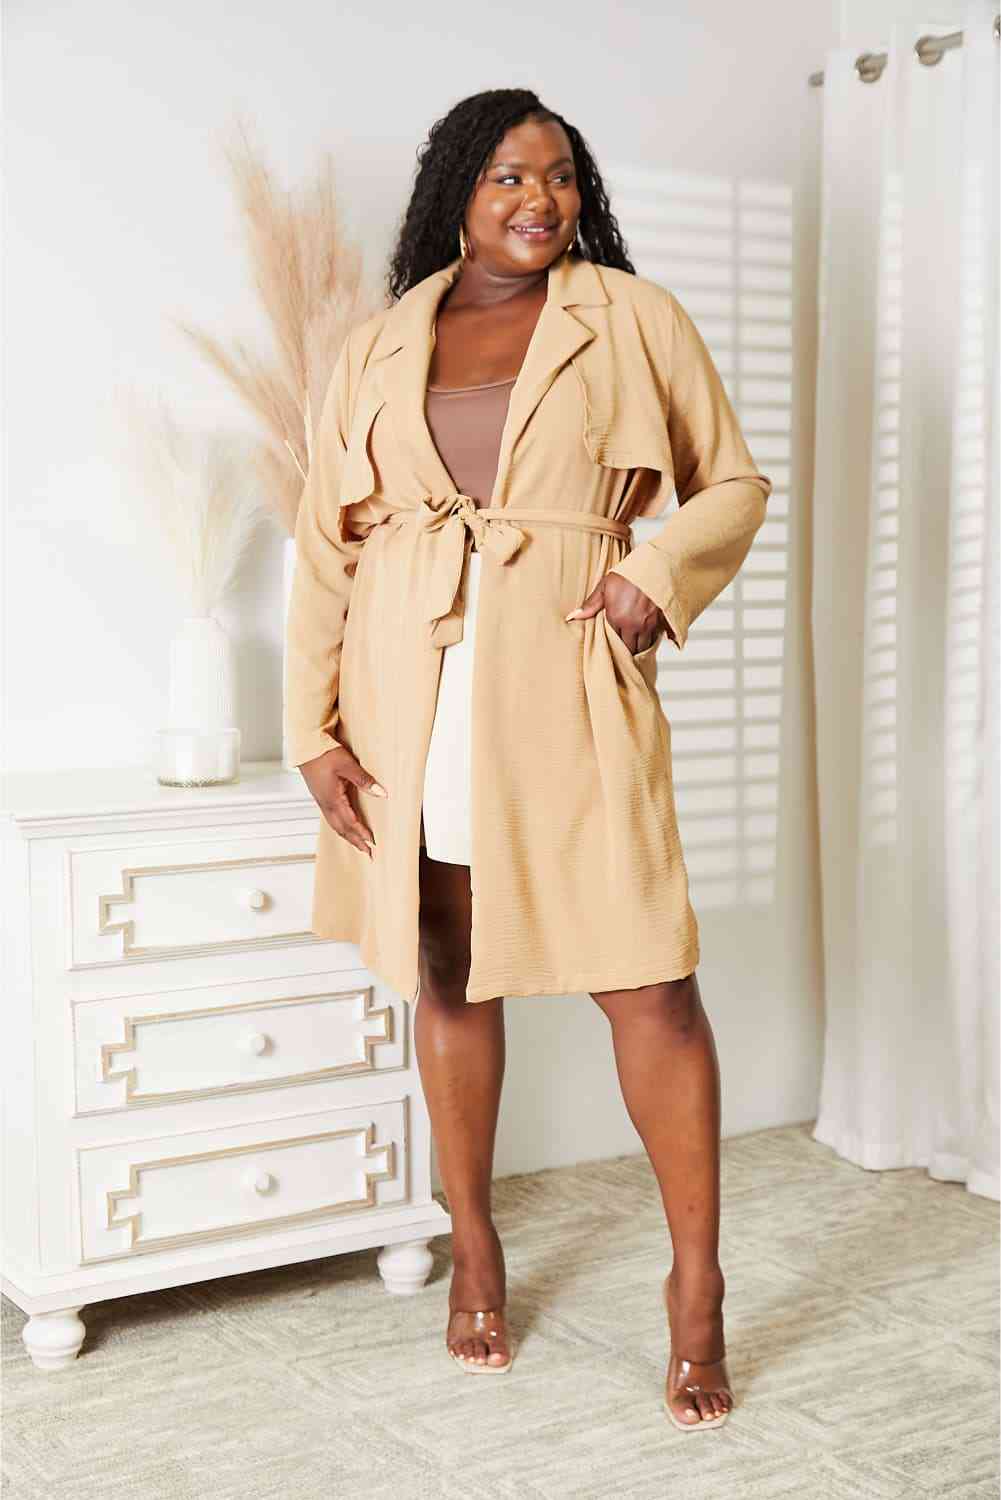 Tied Trench Coat with Pockets by CC - Bellisima Clothing Collective